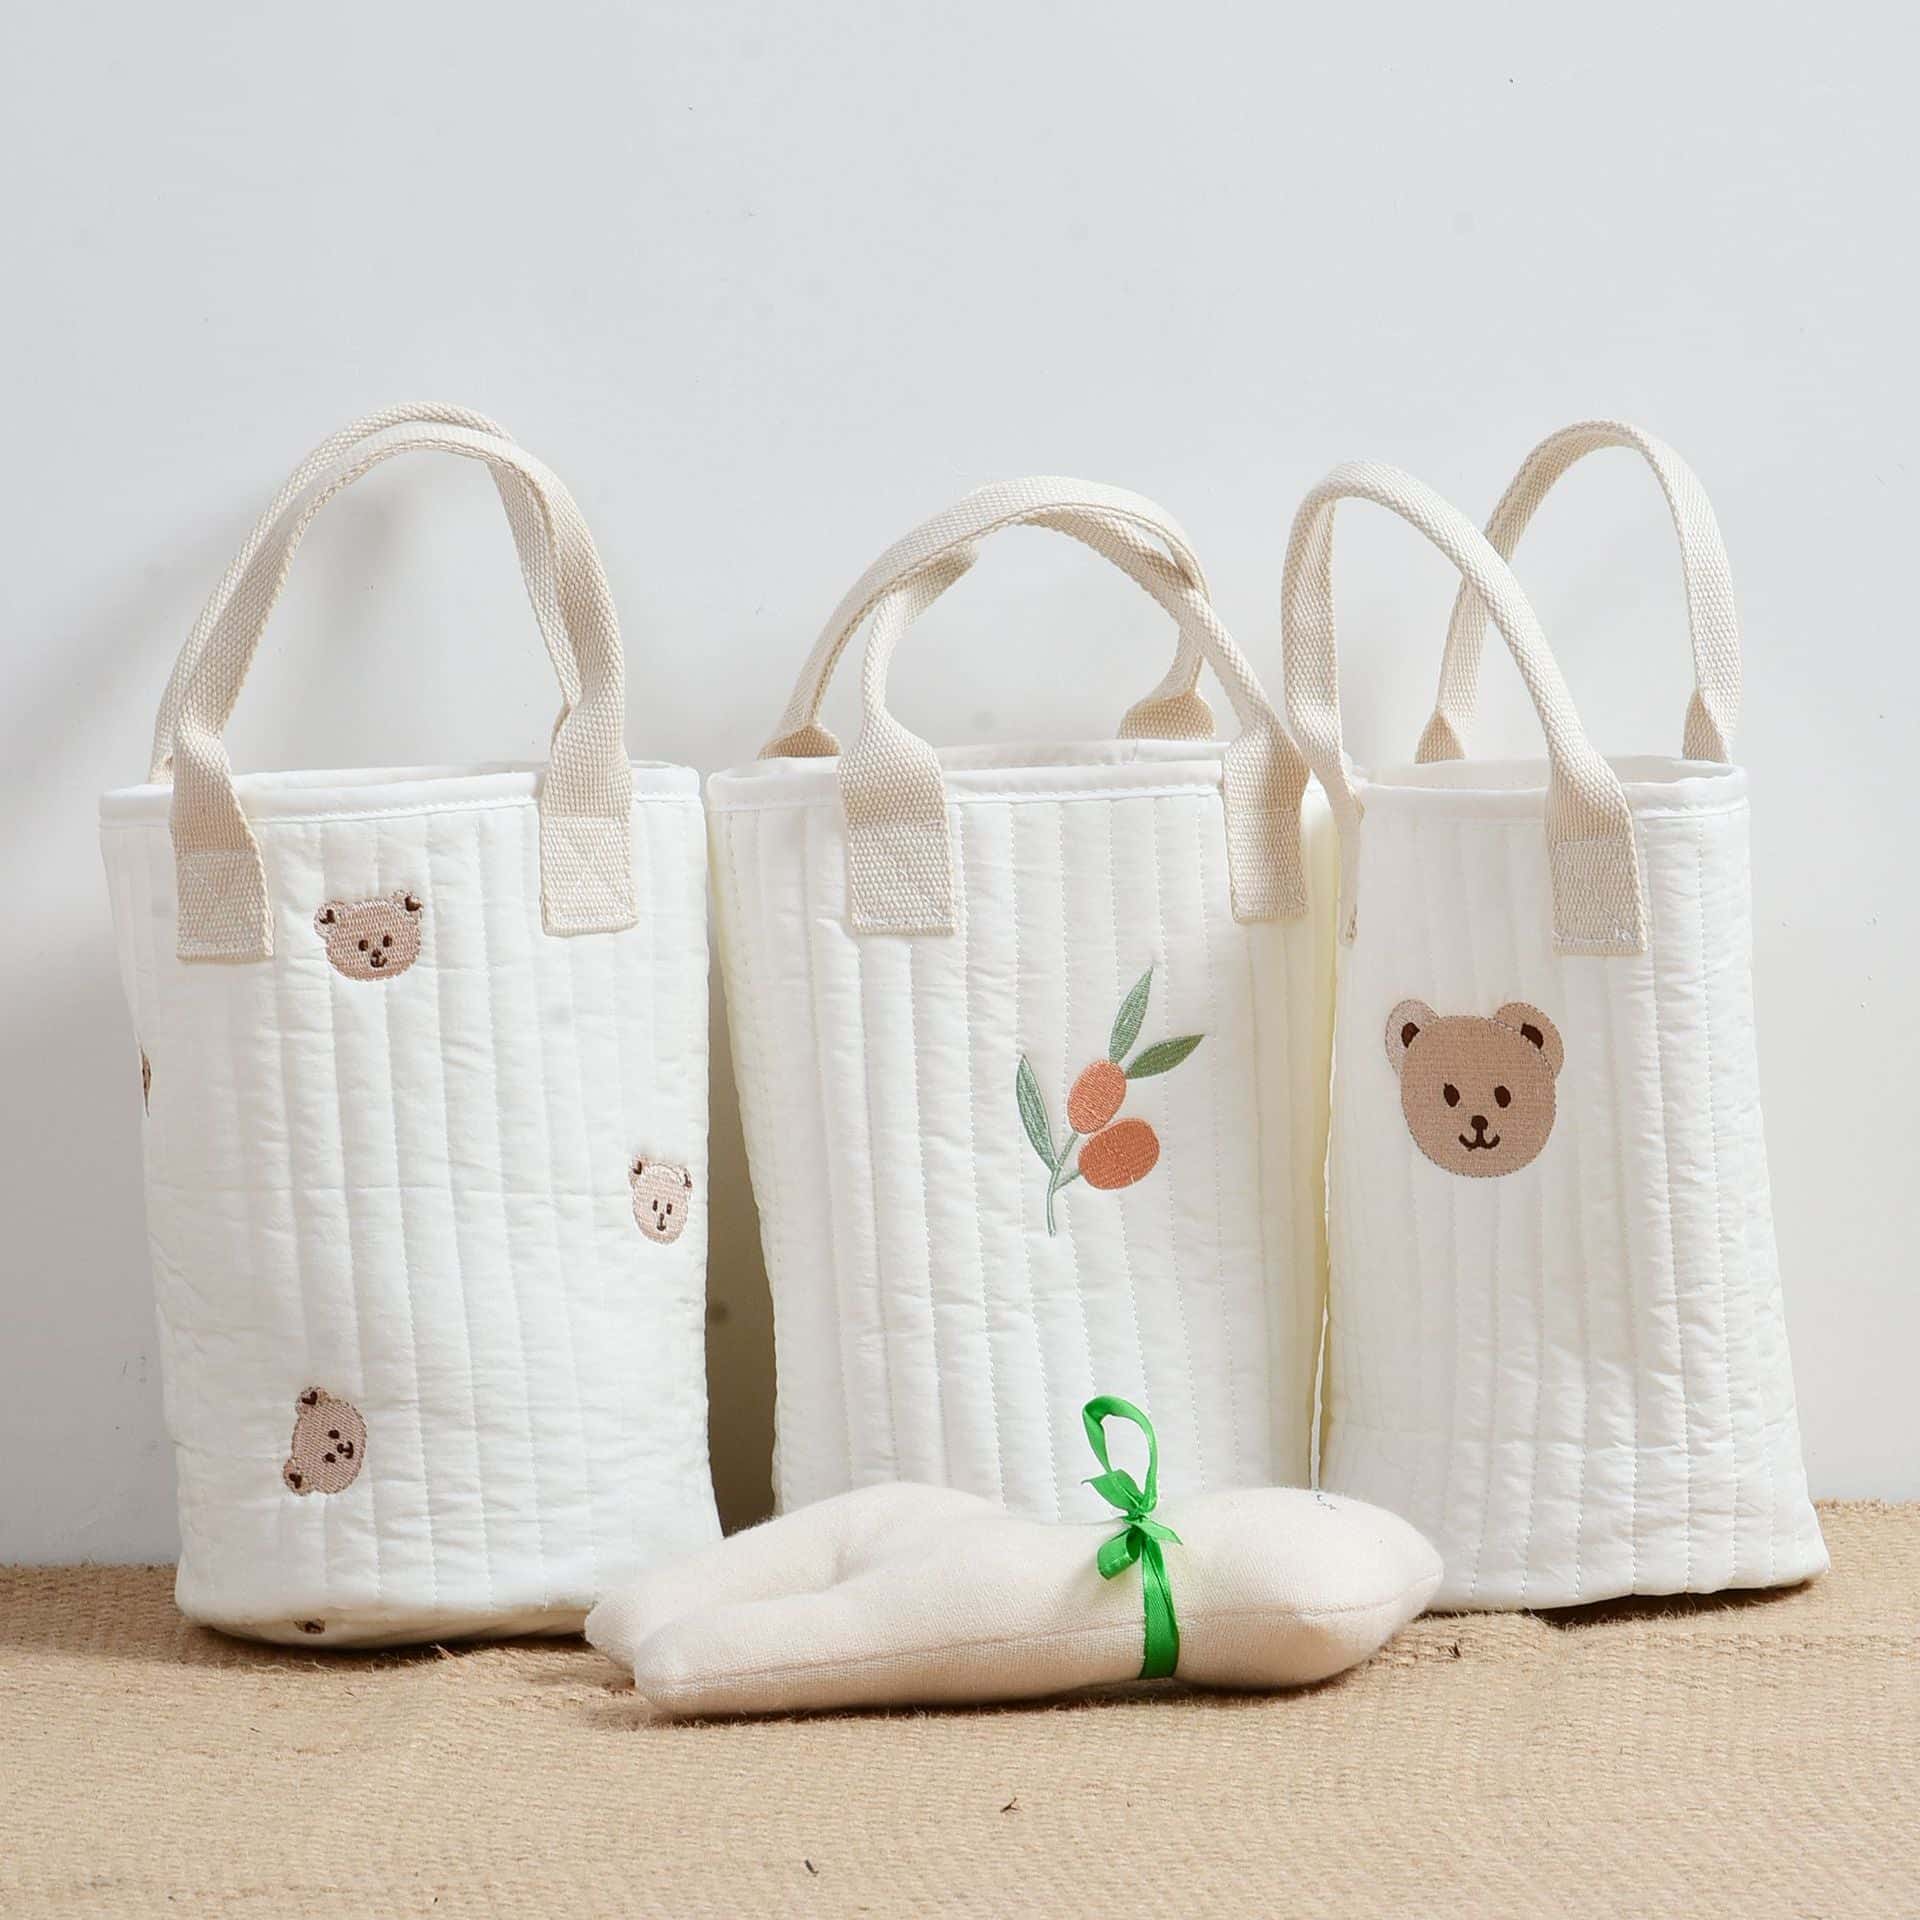 Sac maman multifonctionnelle – Sweet Baby